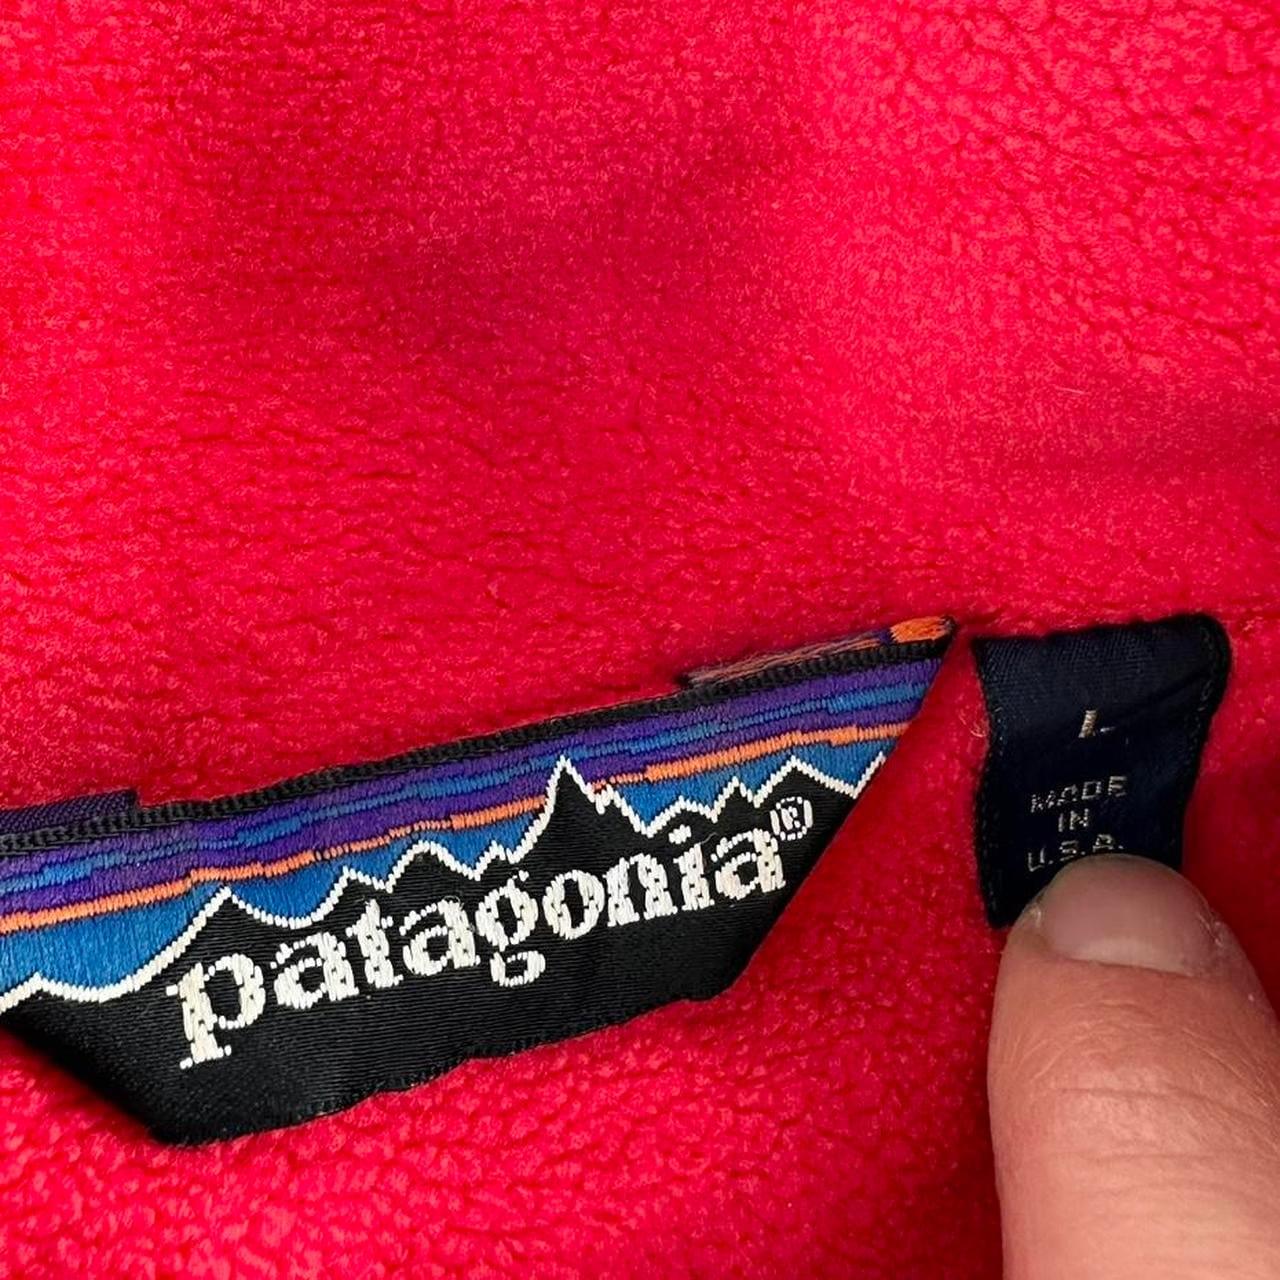 Patagonia fleece lined jacket size S - Known Source